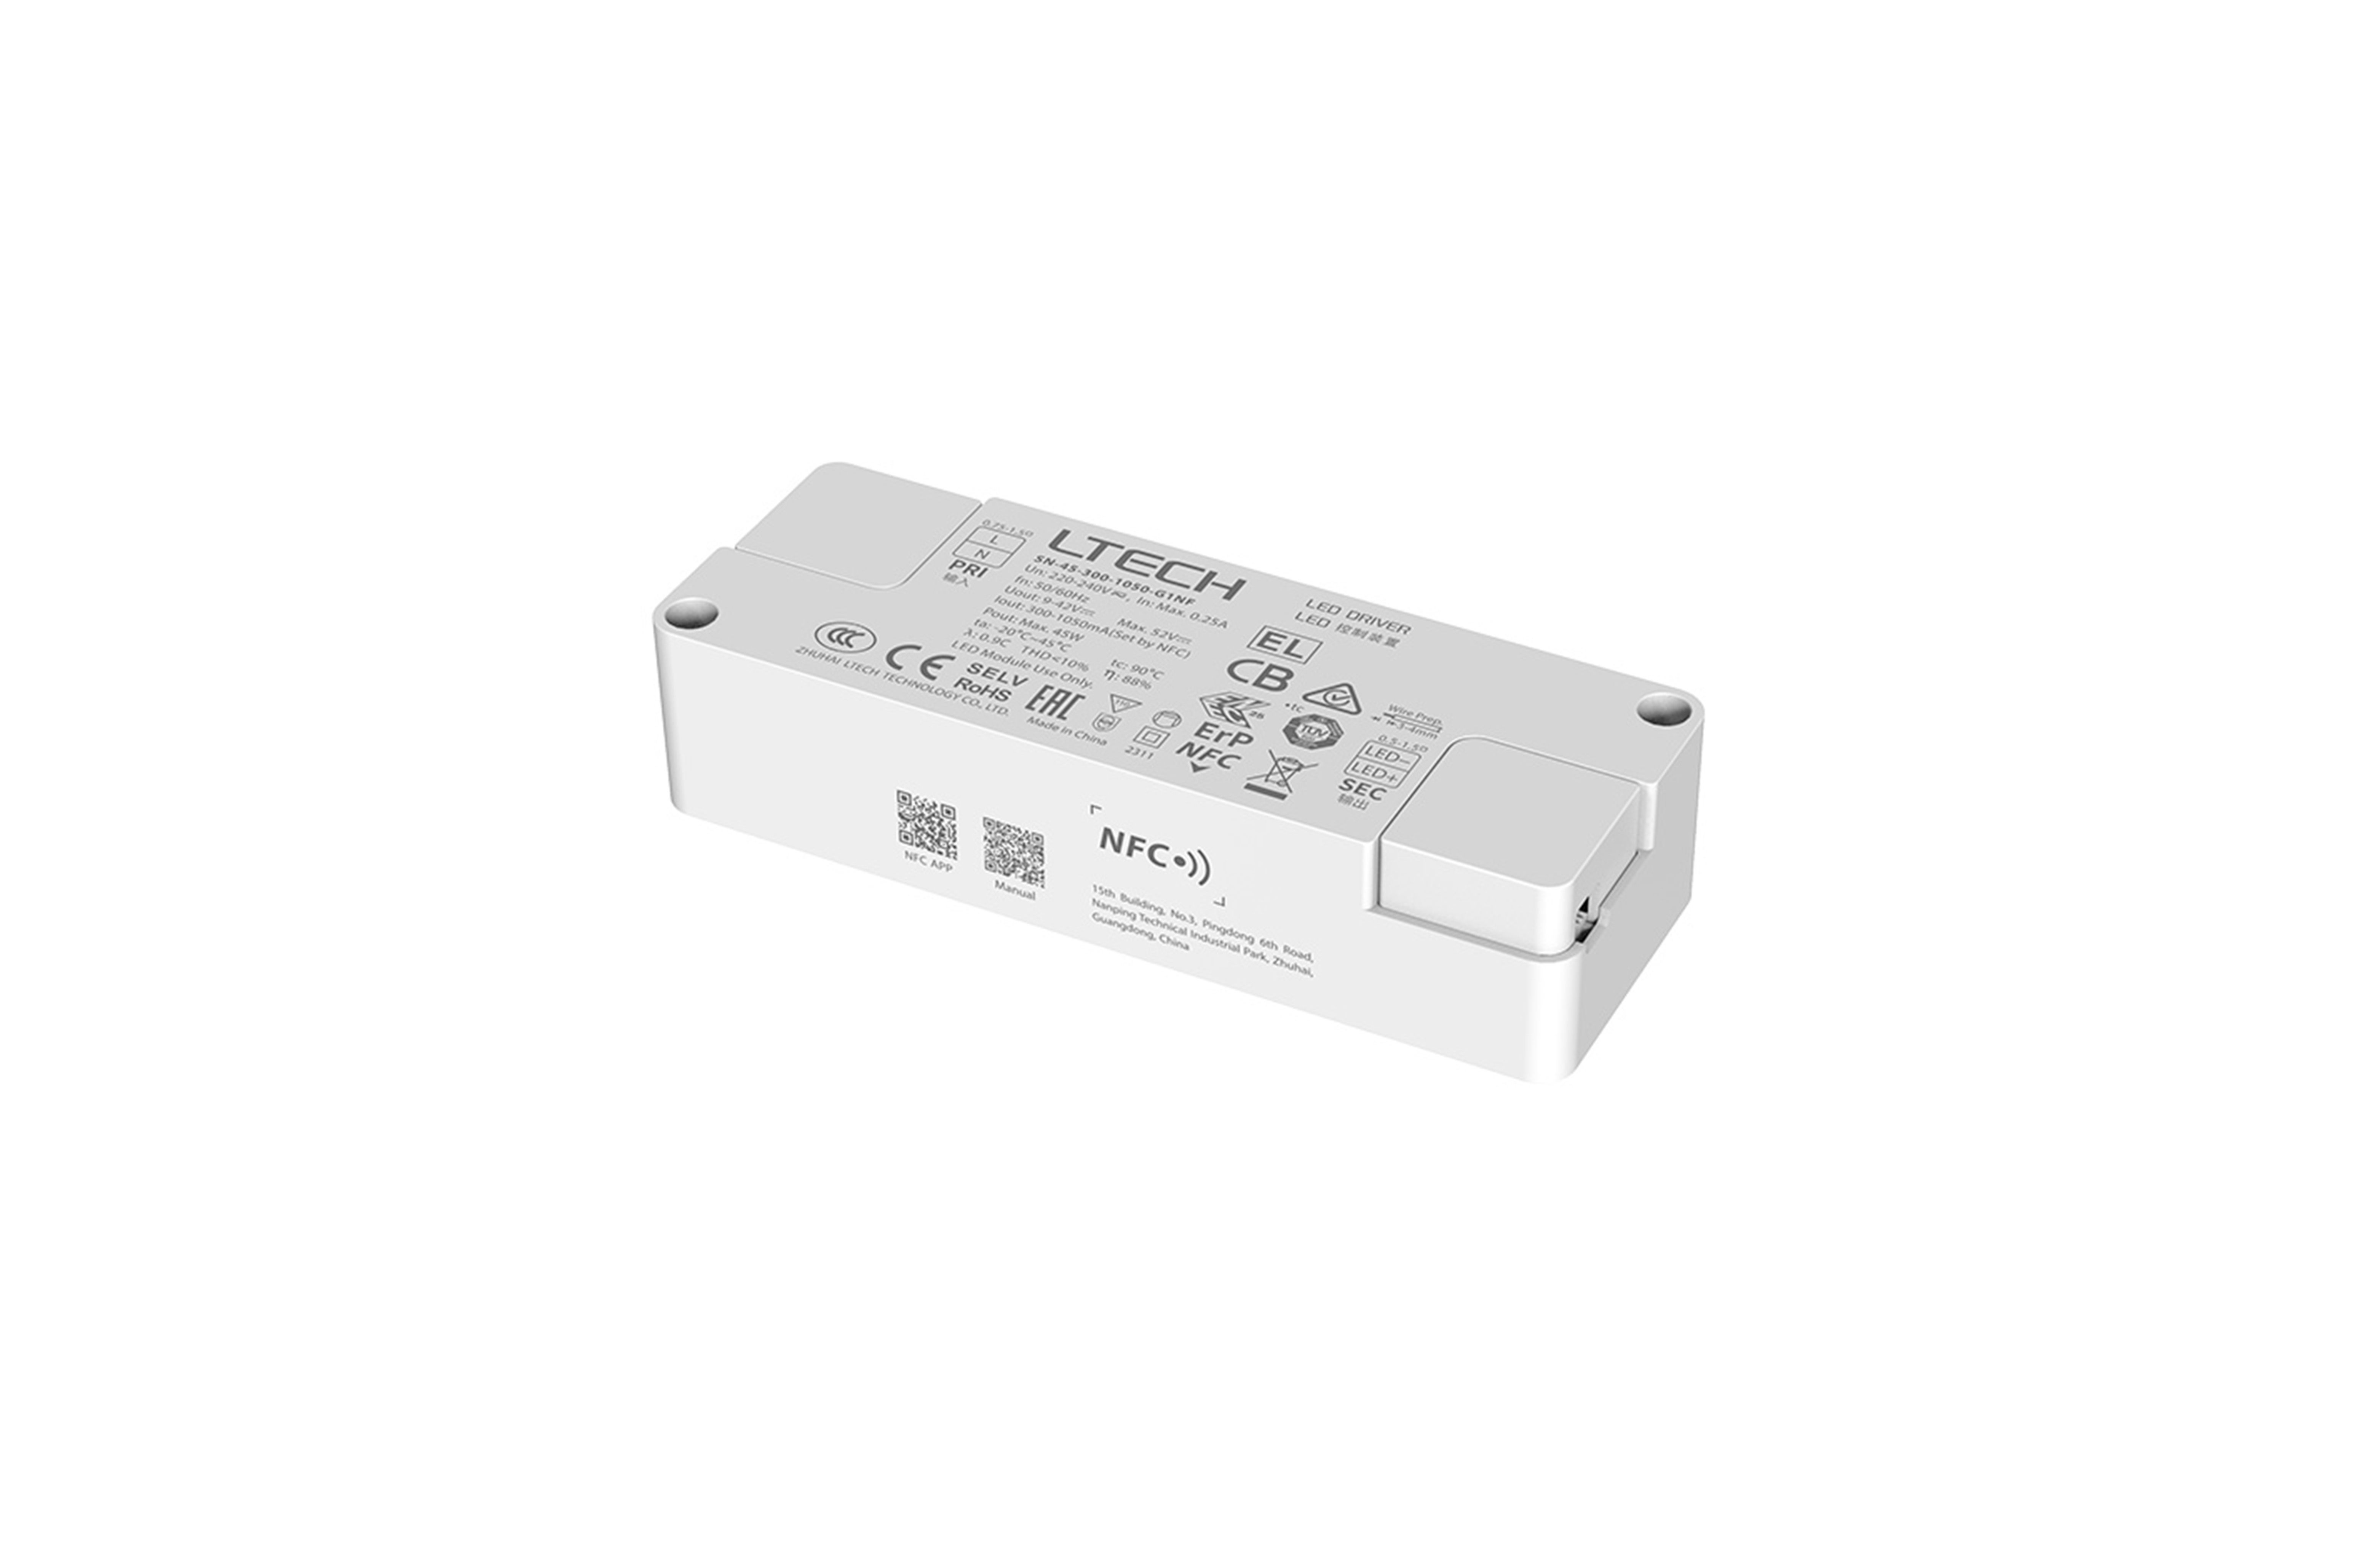 SN-45-300-1050-G1NF  Intelligent Constant Current NFC ON/OFF LED Driver, 45W 300-1050mA ,9-42Vdc , 200-240Vac, Out put Range.2.7W-45W, IP20, 5yrs Warrenty.